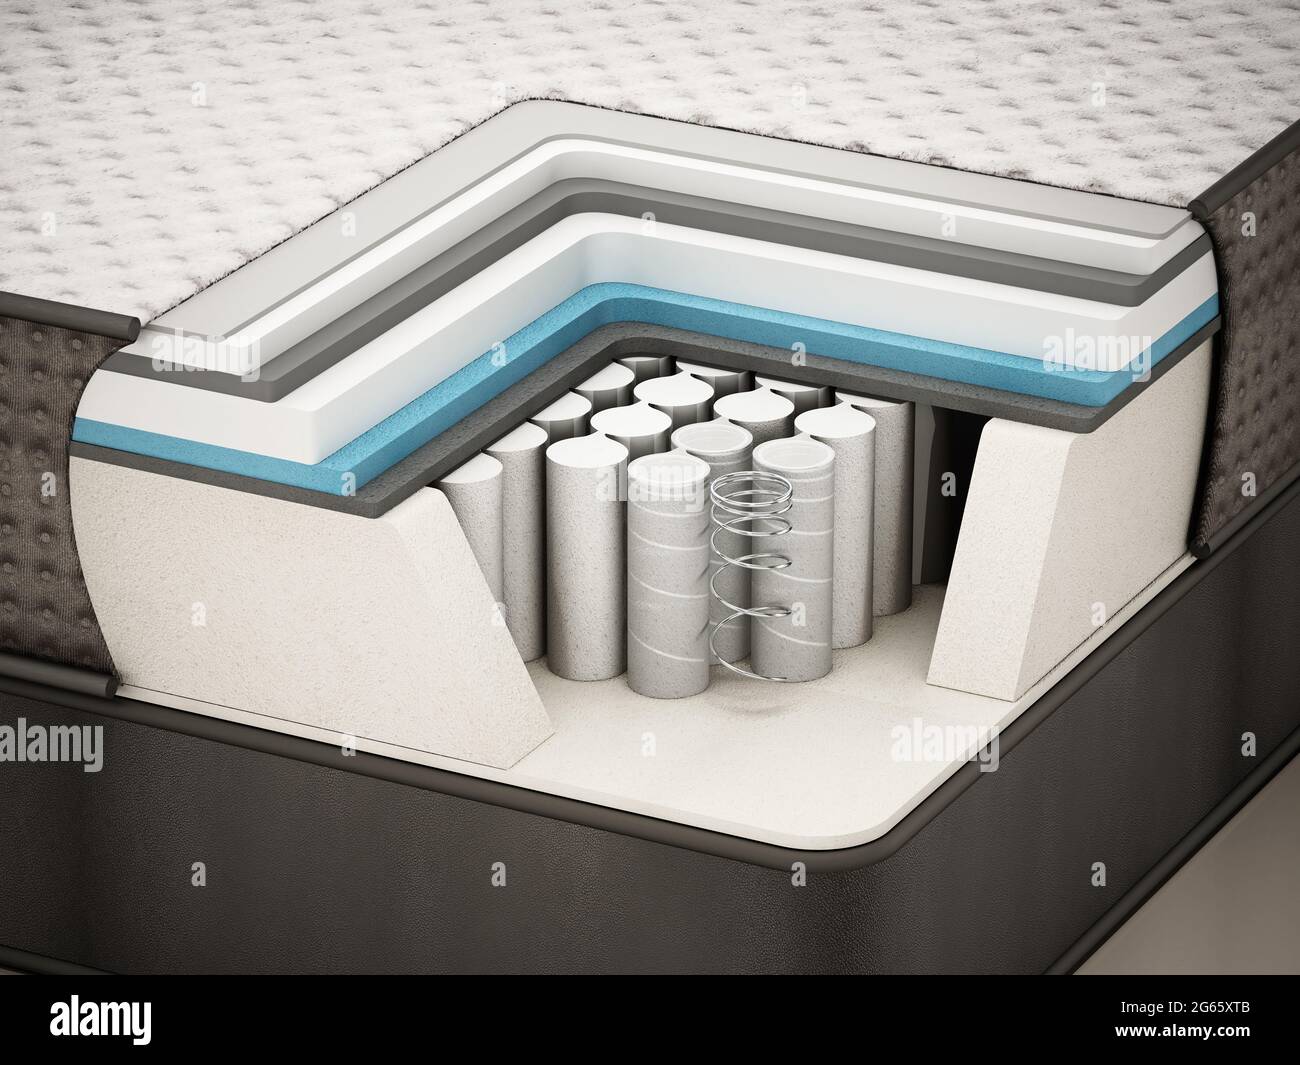 Cross section showing a mattress and the springs inside. 3D illustration. Stock Photo